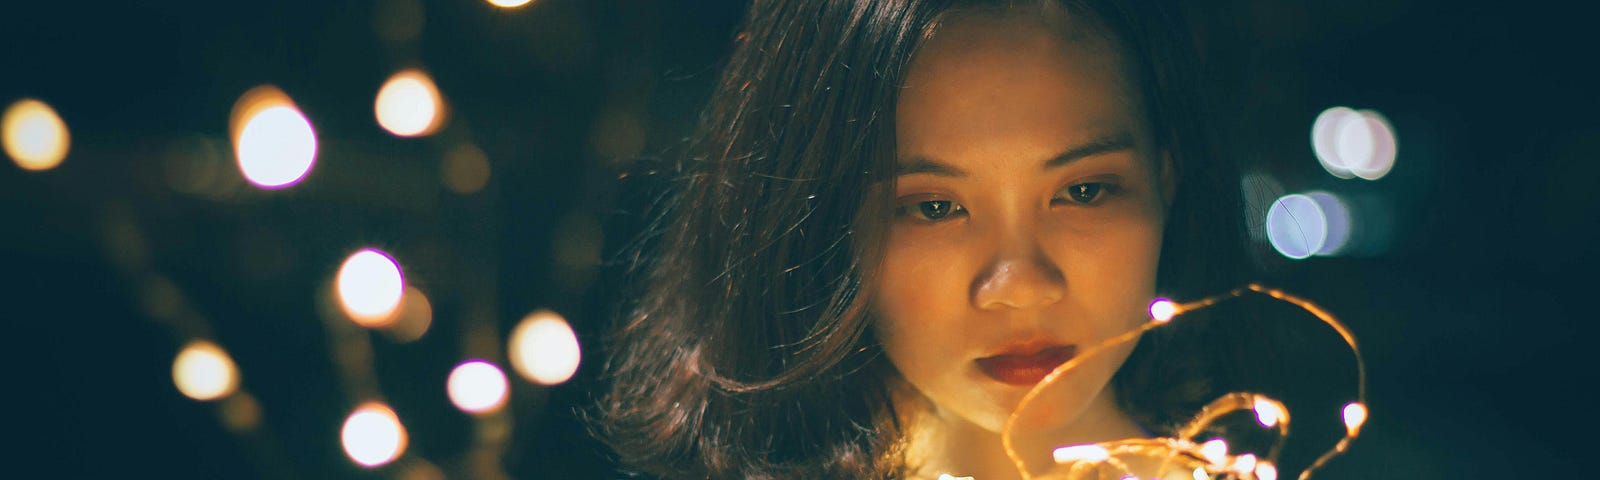 Asian woman gazes at a string of fairy lights in her hand; they cast a soft glow on her face.